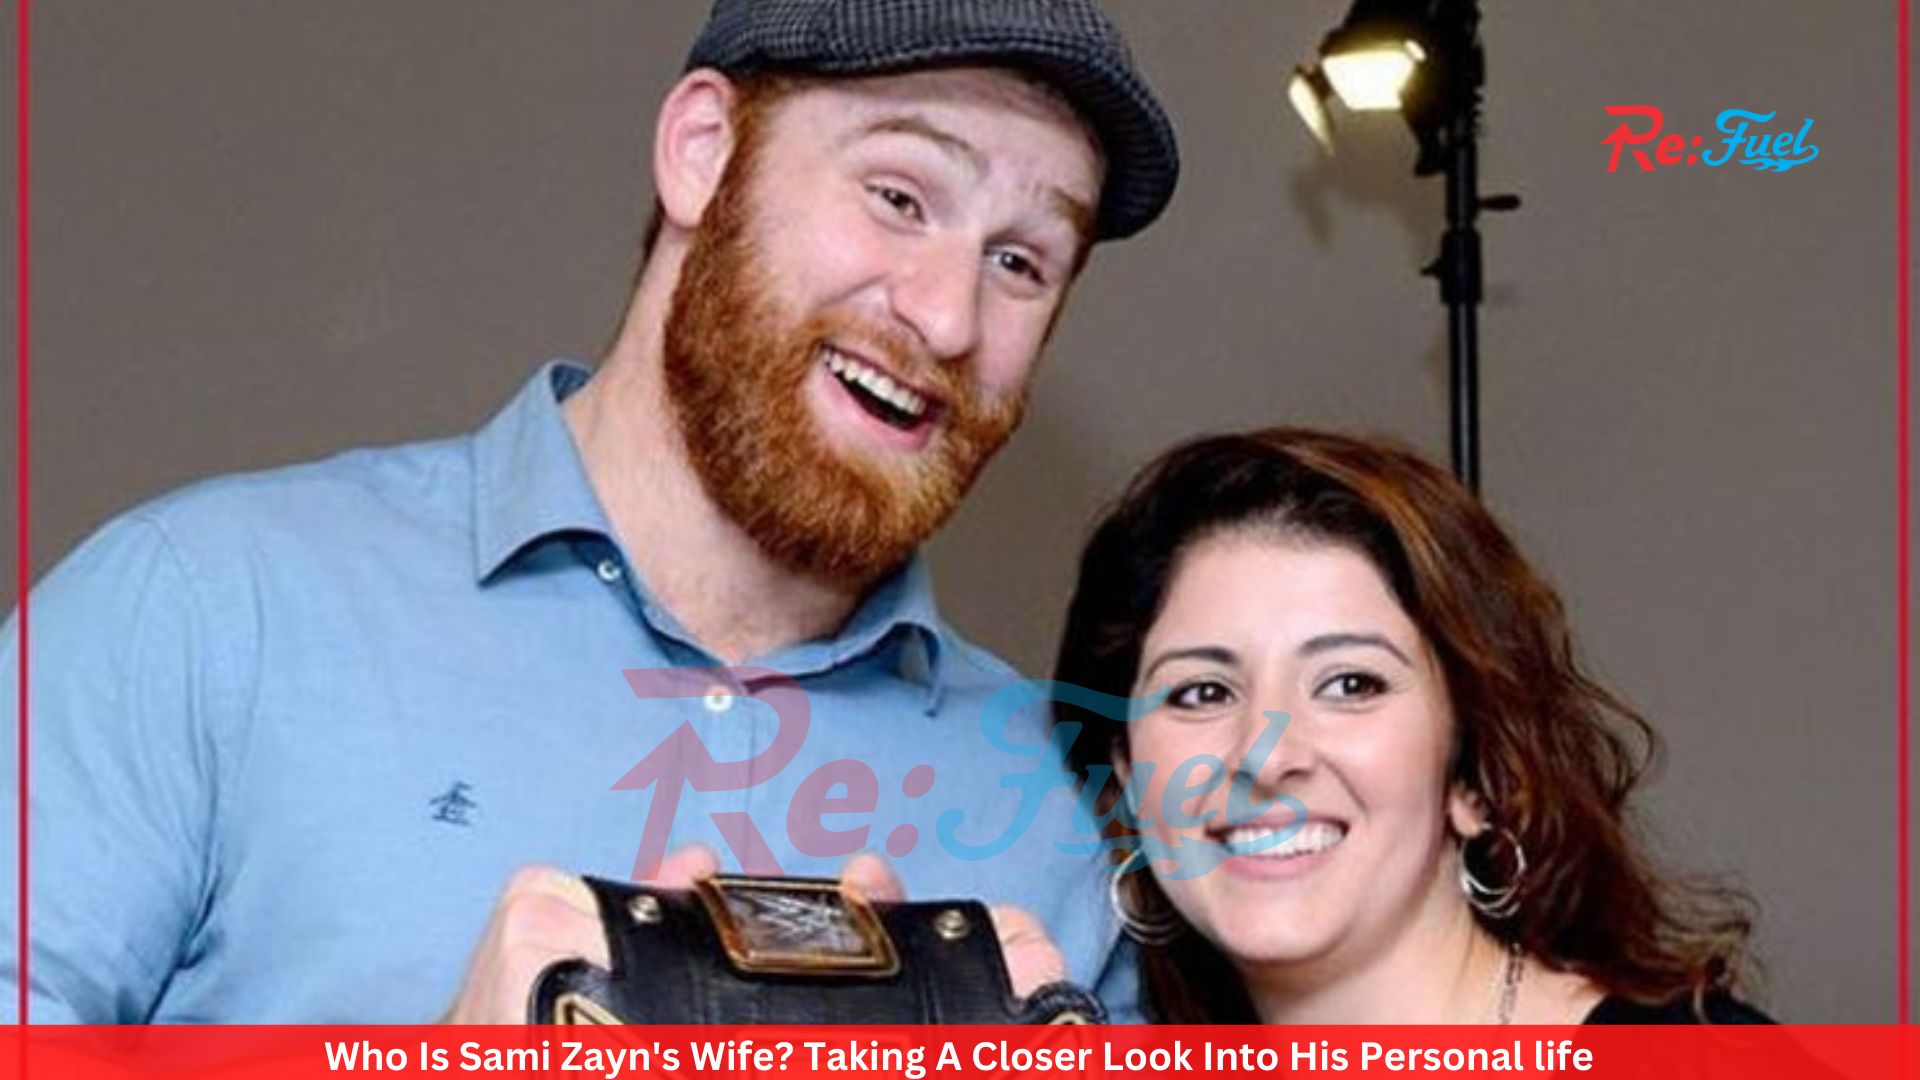 Who Is Sami Zayn's Wife? Taking A Closer Look Into His Personal life